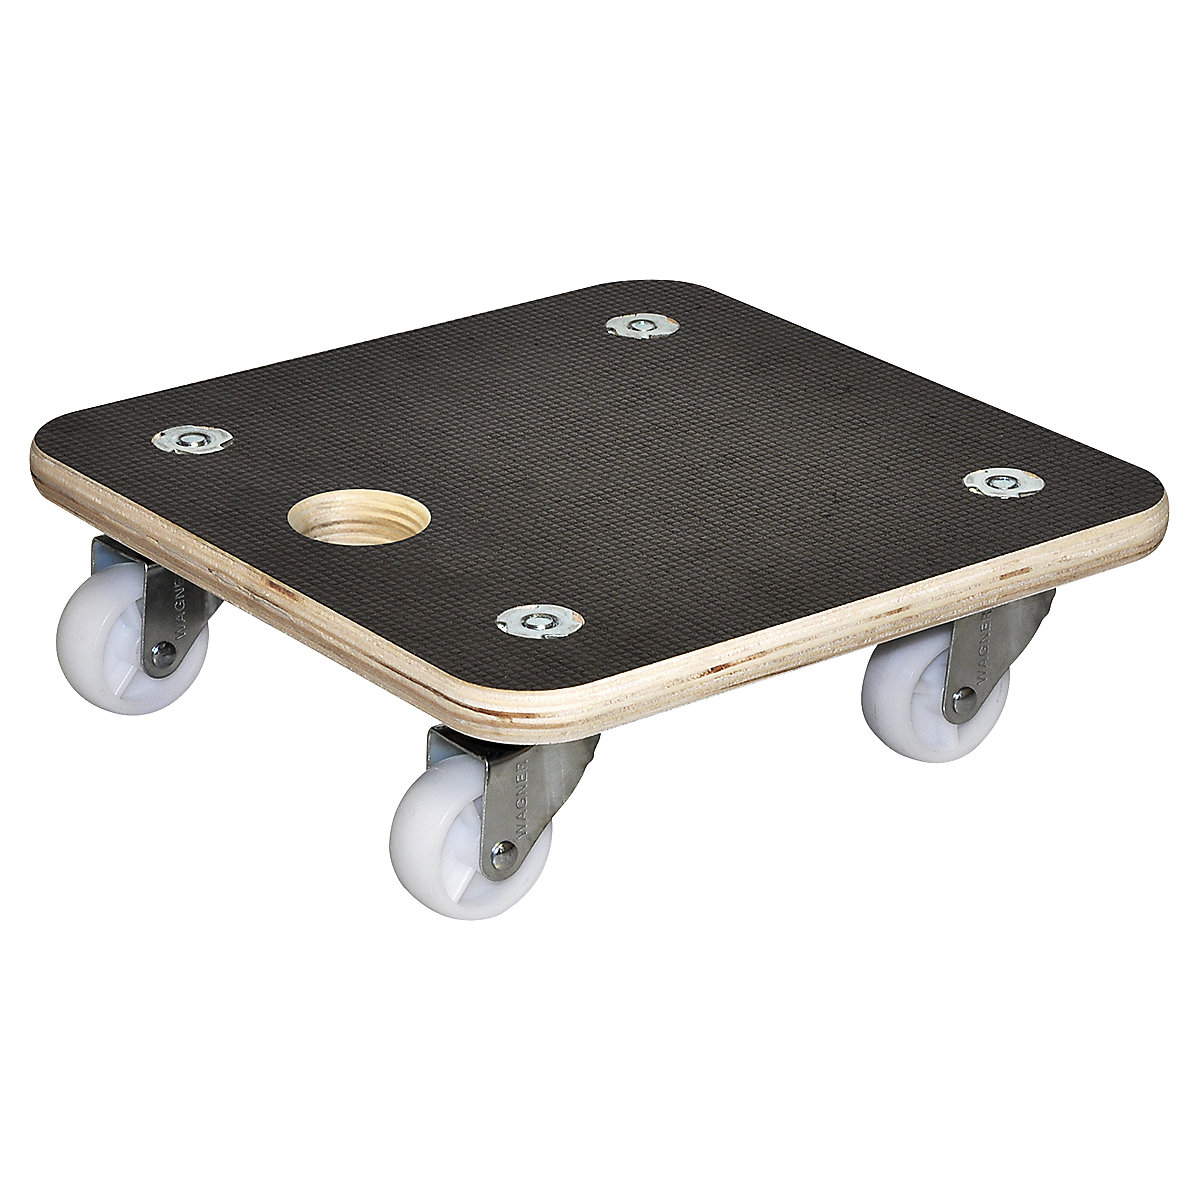 Wagner – MaxiGRIP GH 1350 universal dolly, LxW 290 x 290 mm, max. load 200 kg